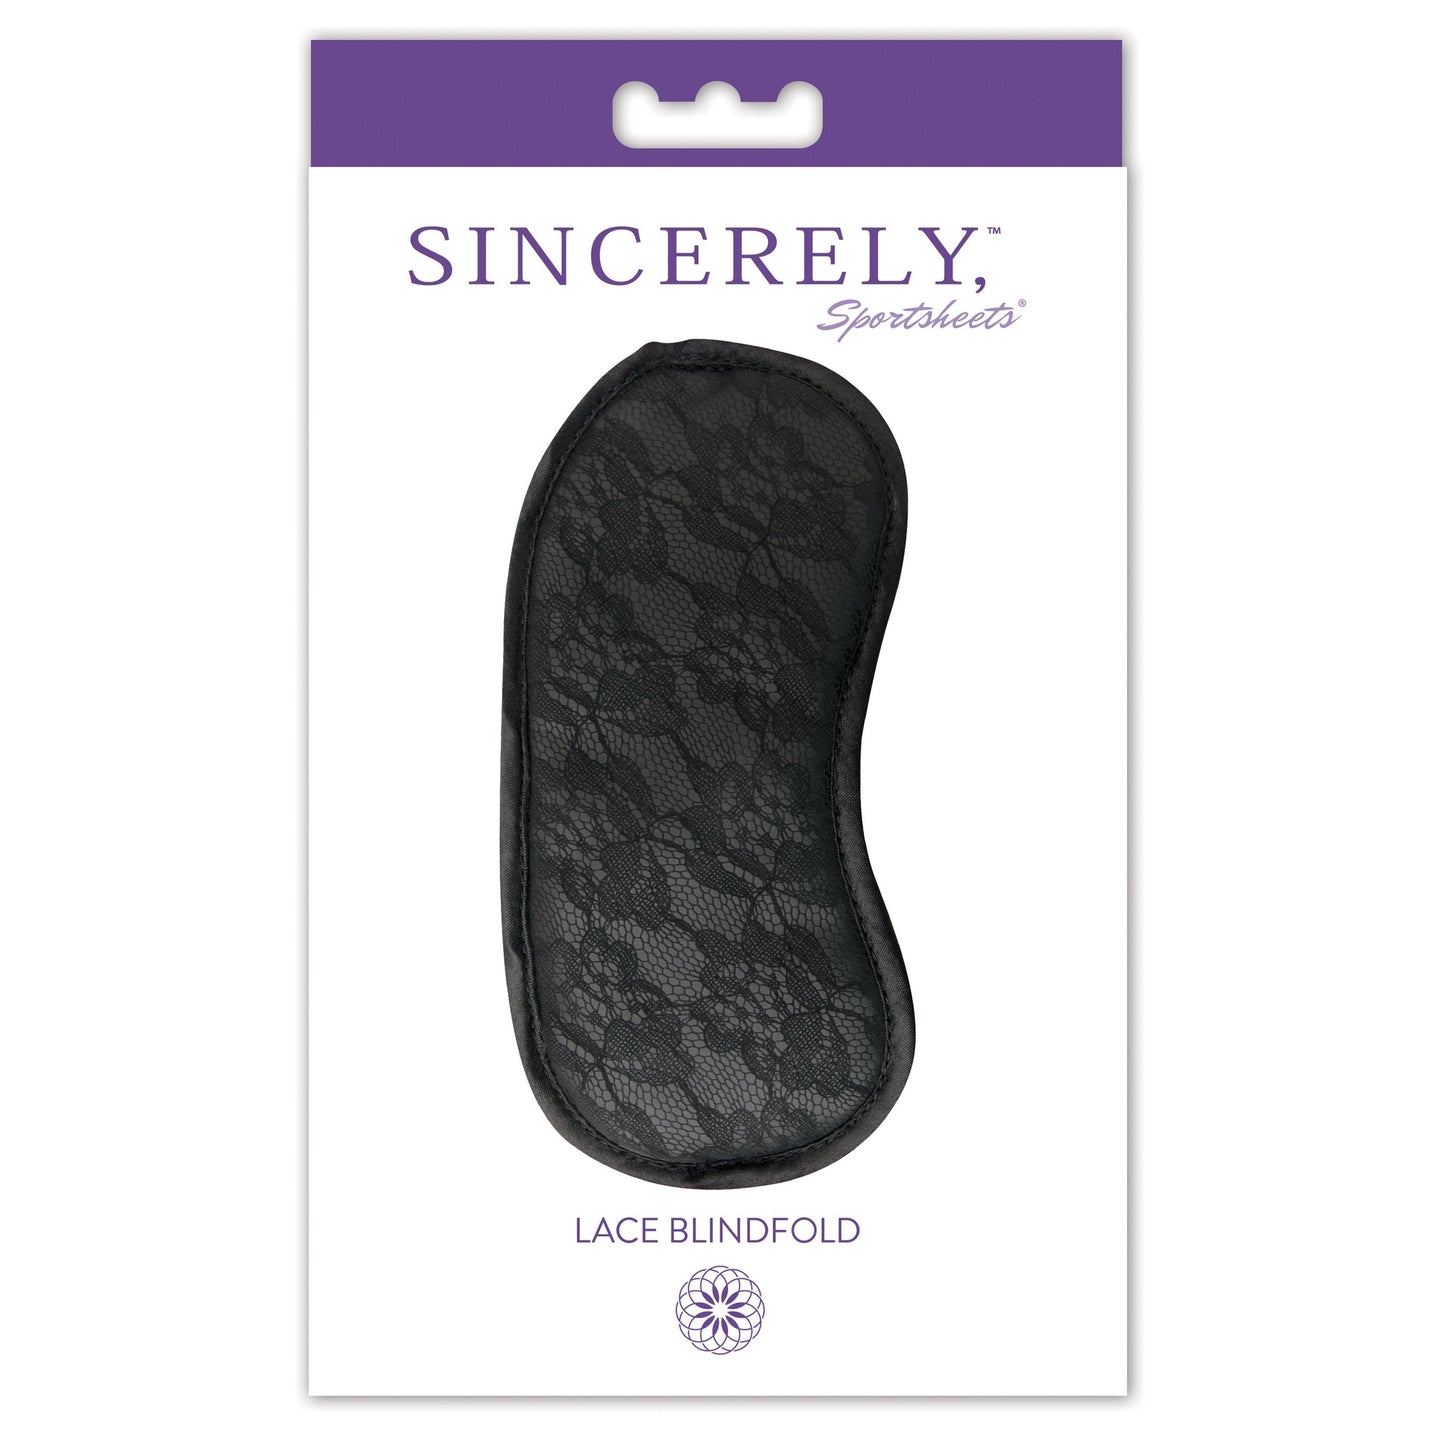 Sincerely by Sportsheets Lace Blindfold - Black - Thorn & Feather